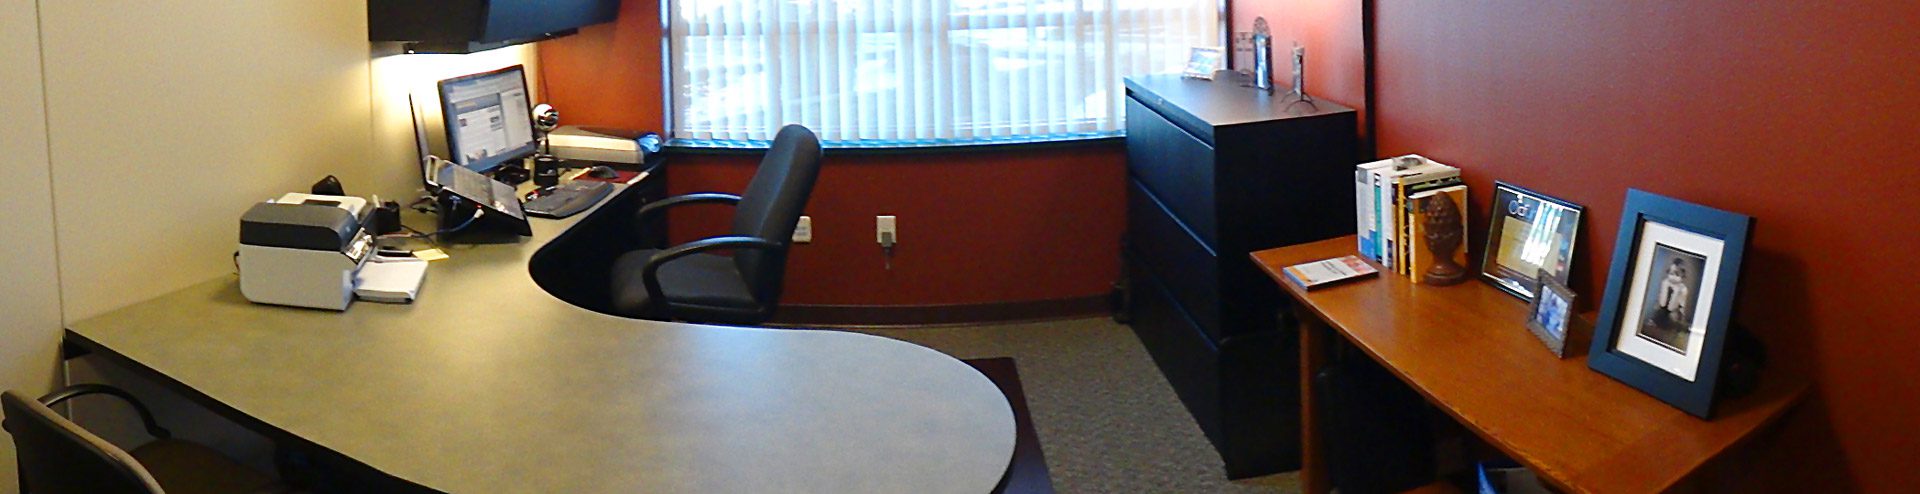 Office space for lease at CTC